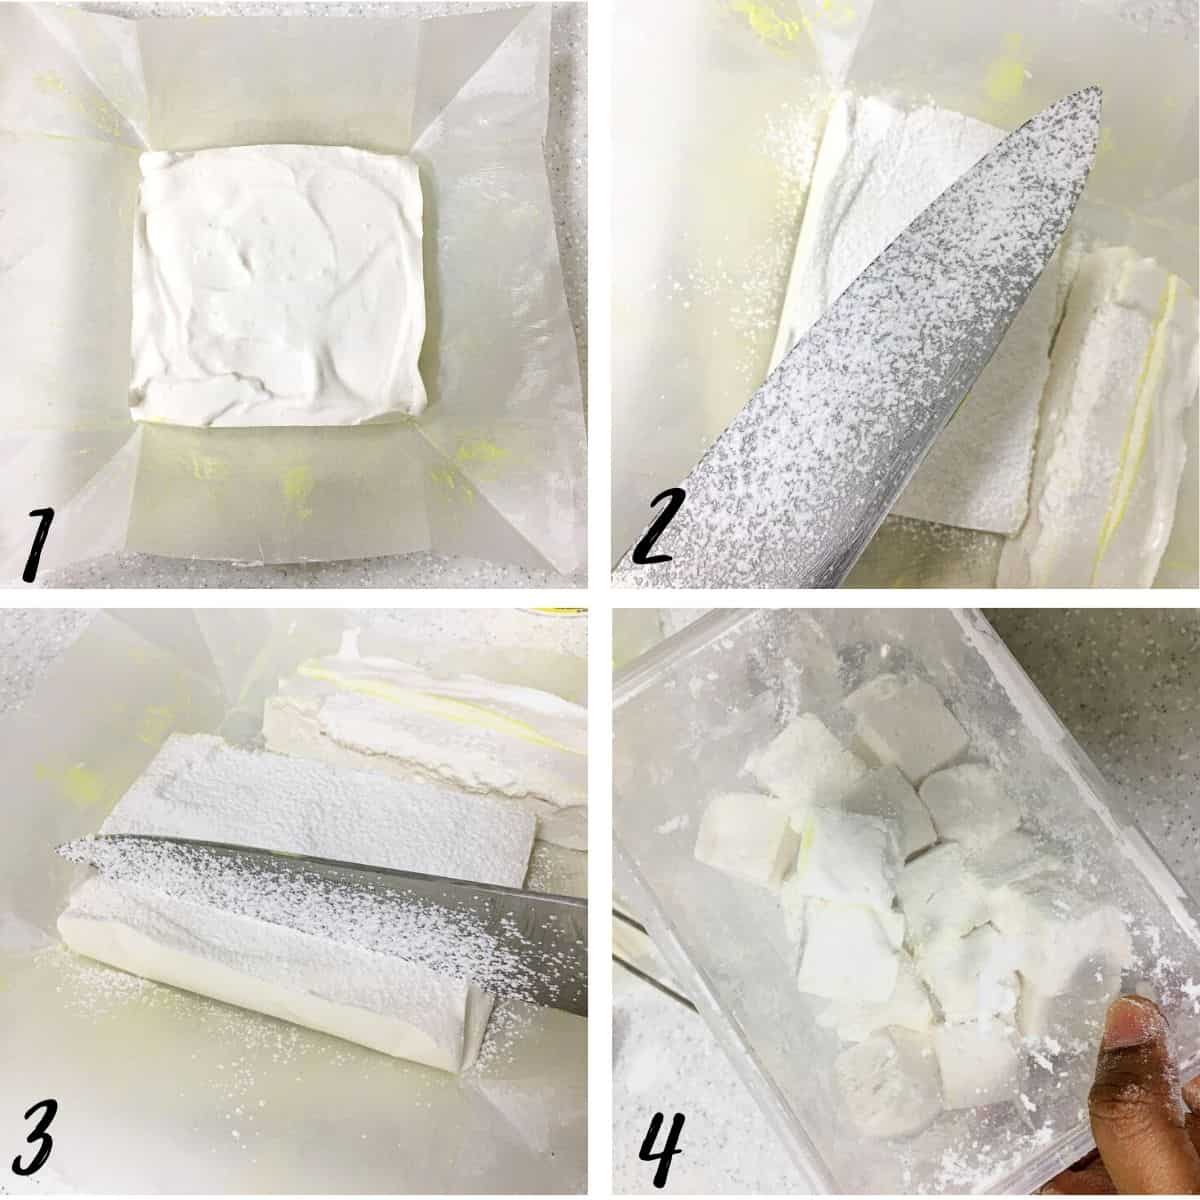 A poster of 4 images showing how to dust a knife, cut a block of marshmallow and toss the cut marshmallows into icing sugar dusting.